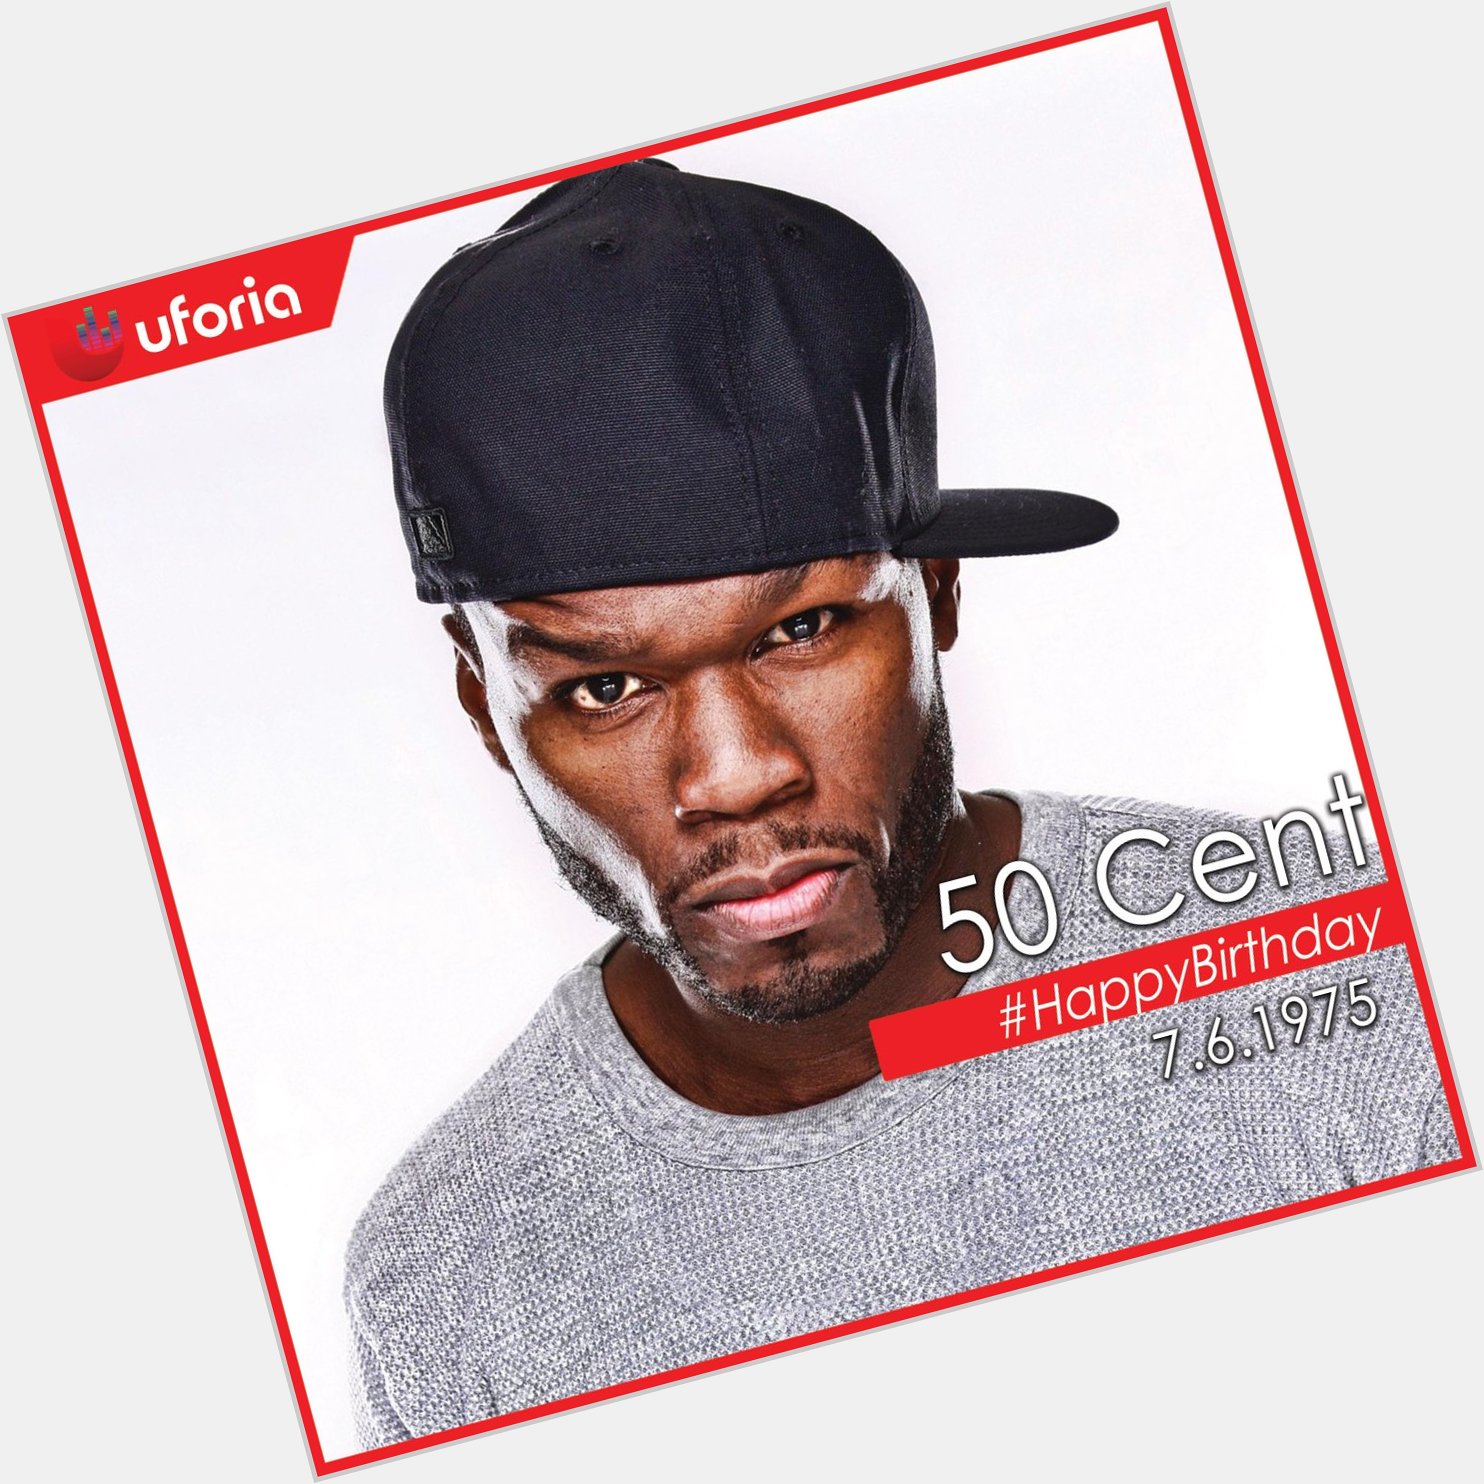 Happy Birthday to Curtis Jackson a.k.a. 50 Cent! 40 years young!    